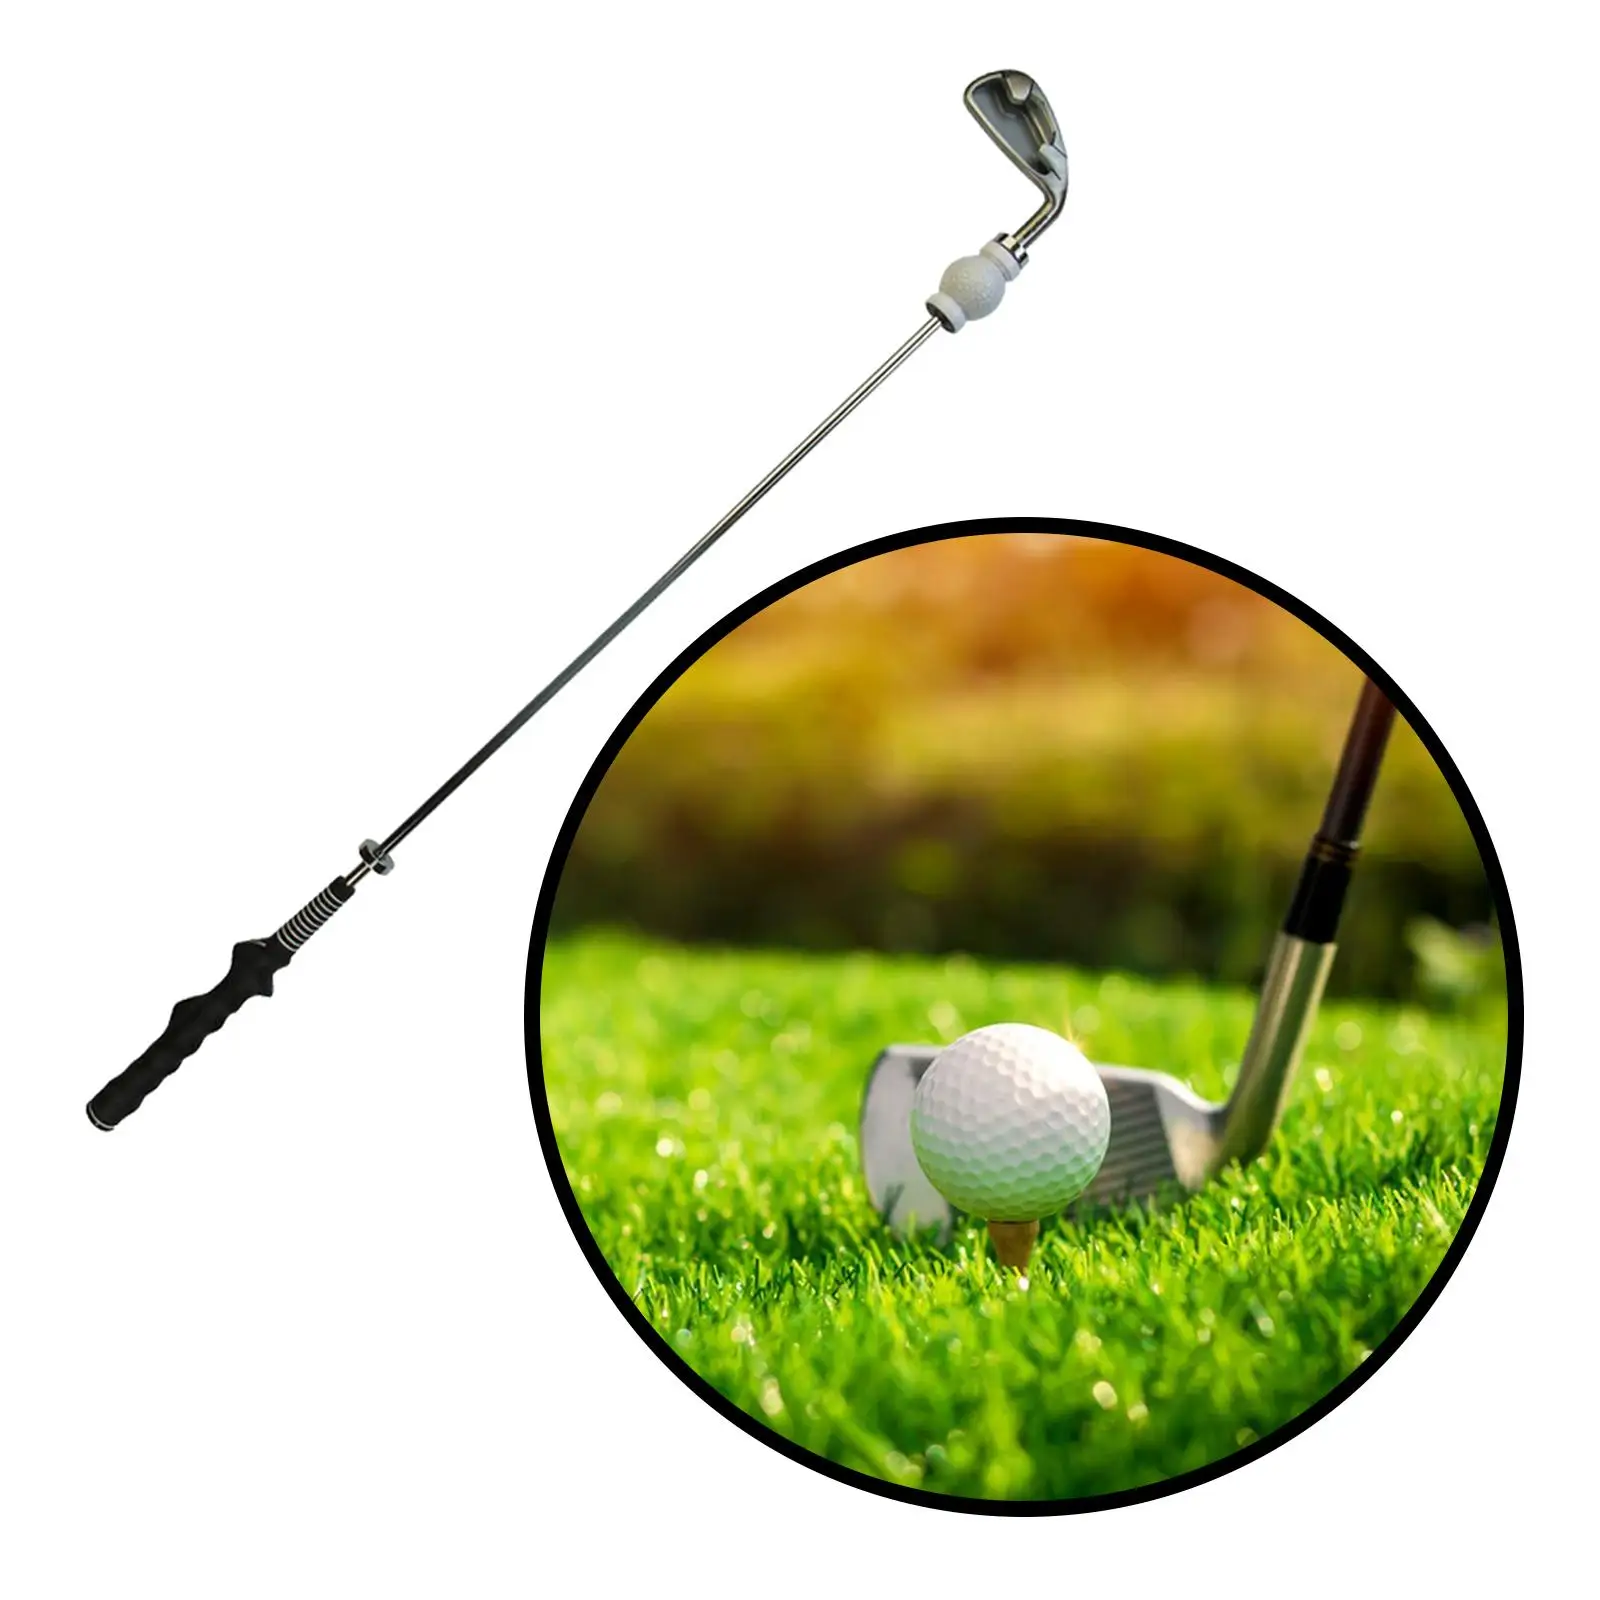 

Golf Swing Trainer Stick Golf Accessory Indoor Correct Grip Posture Outdoor Adult Practice for Balance Flexibility Speed Rhythm